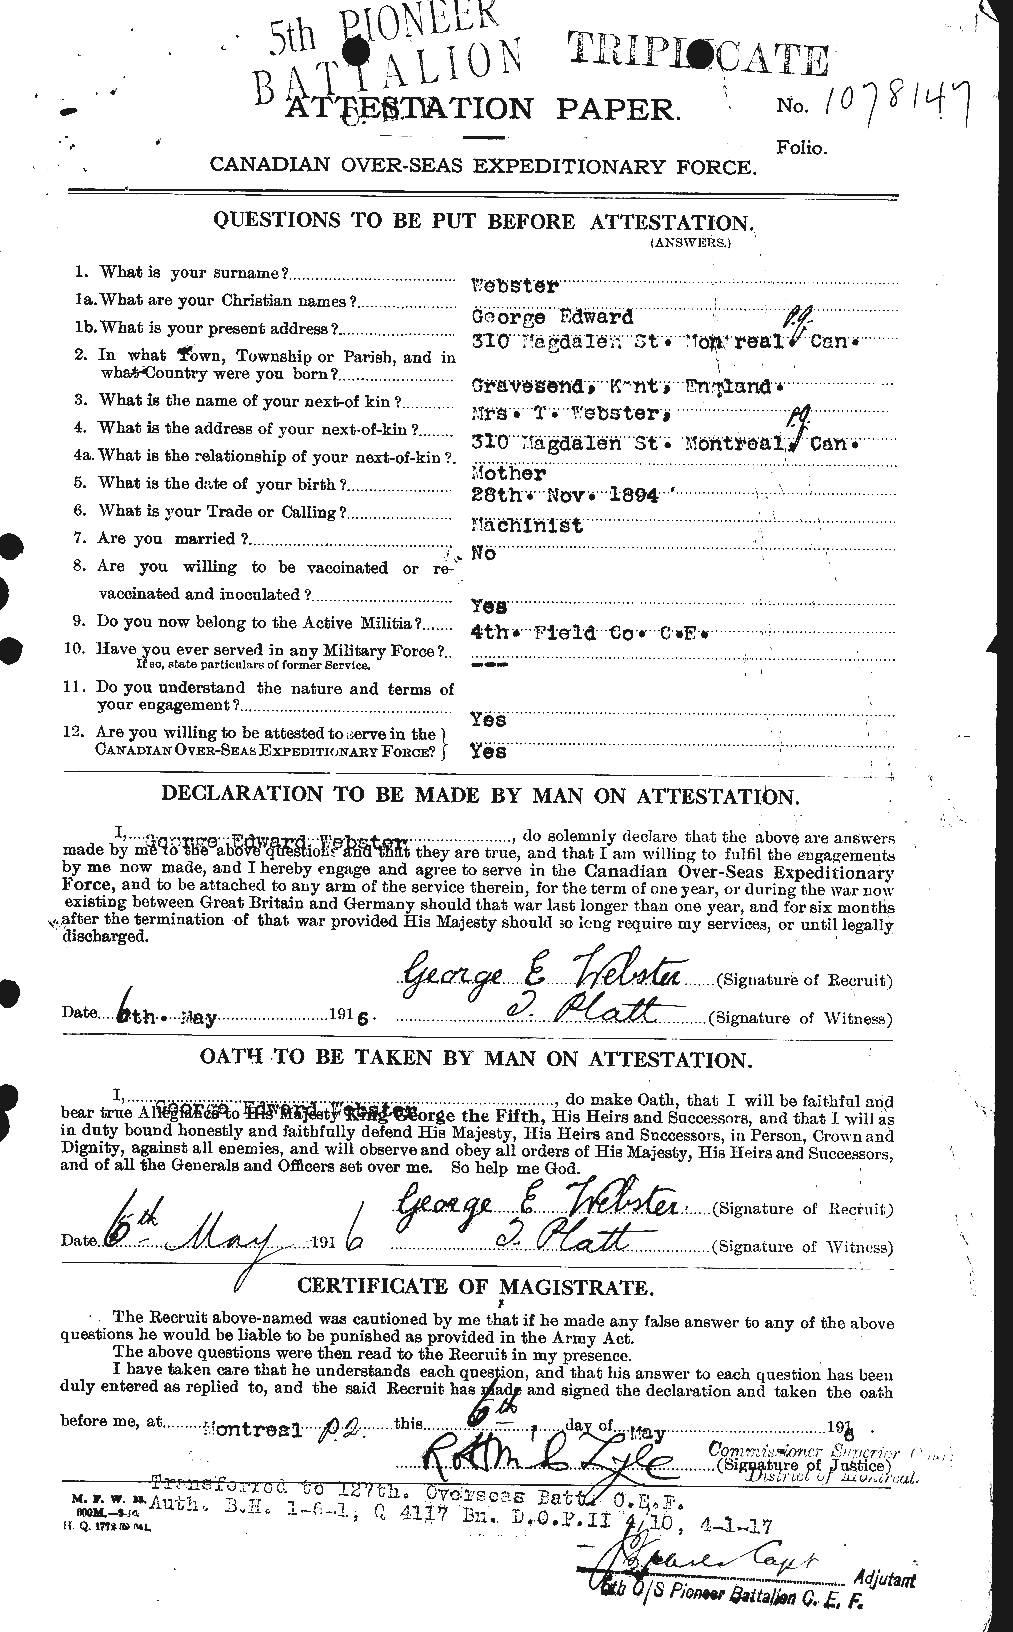 Personnel Records of the First World War - CEF 670383a